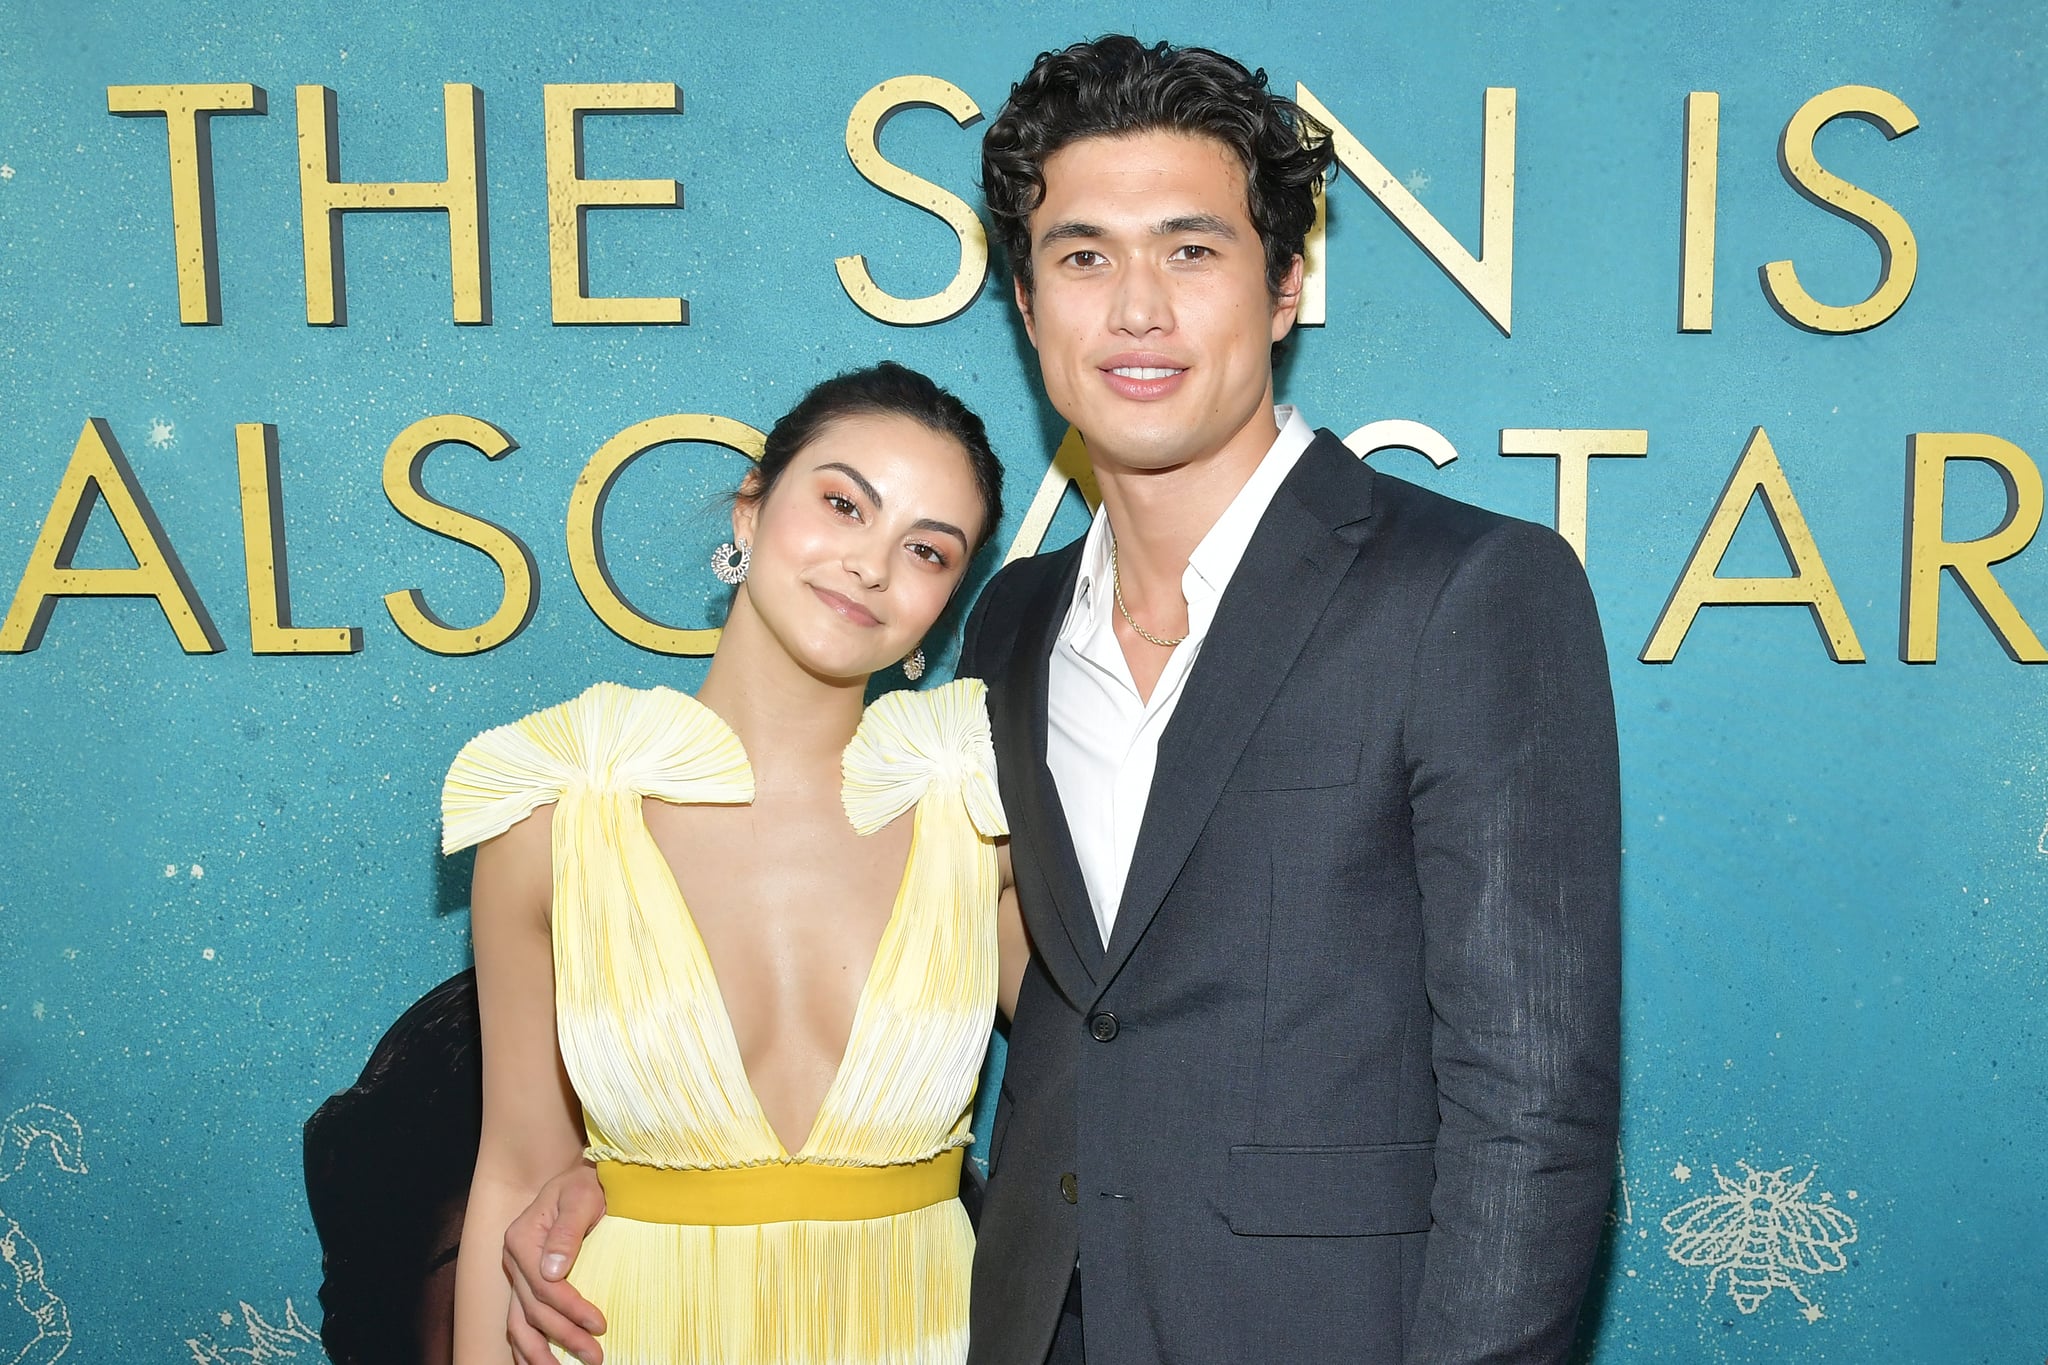 LOS ANGELES, CALIFORNIA - MAY 13: Camila Mendes and Charles Melton attend the world premiere of Warner Bros